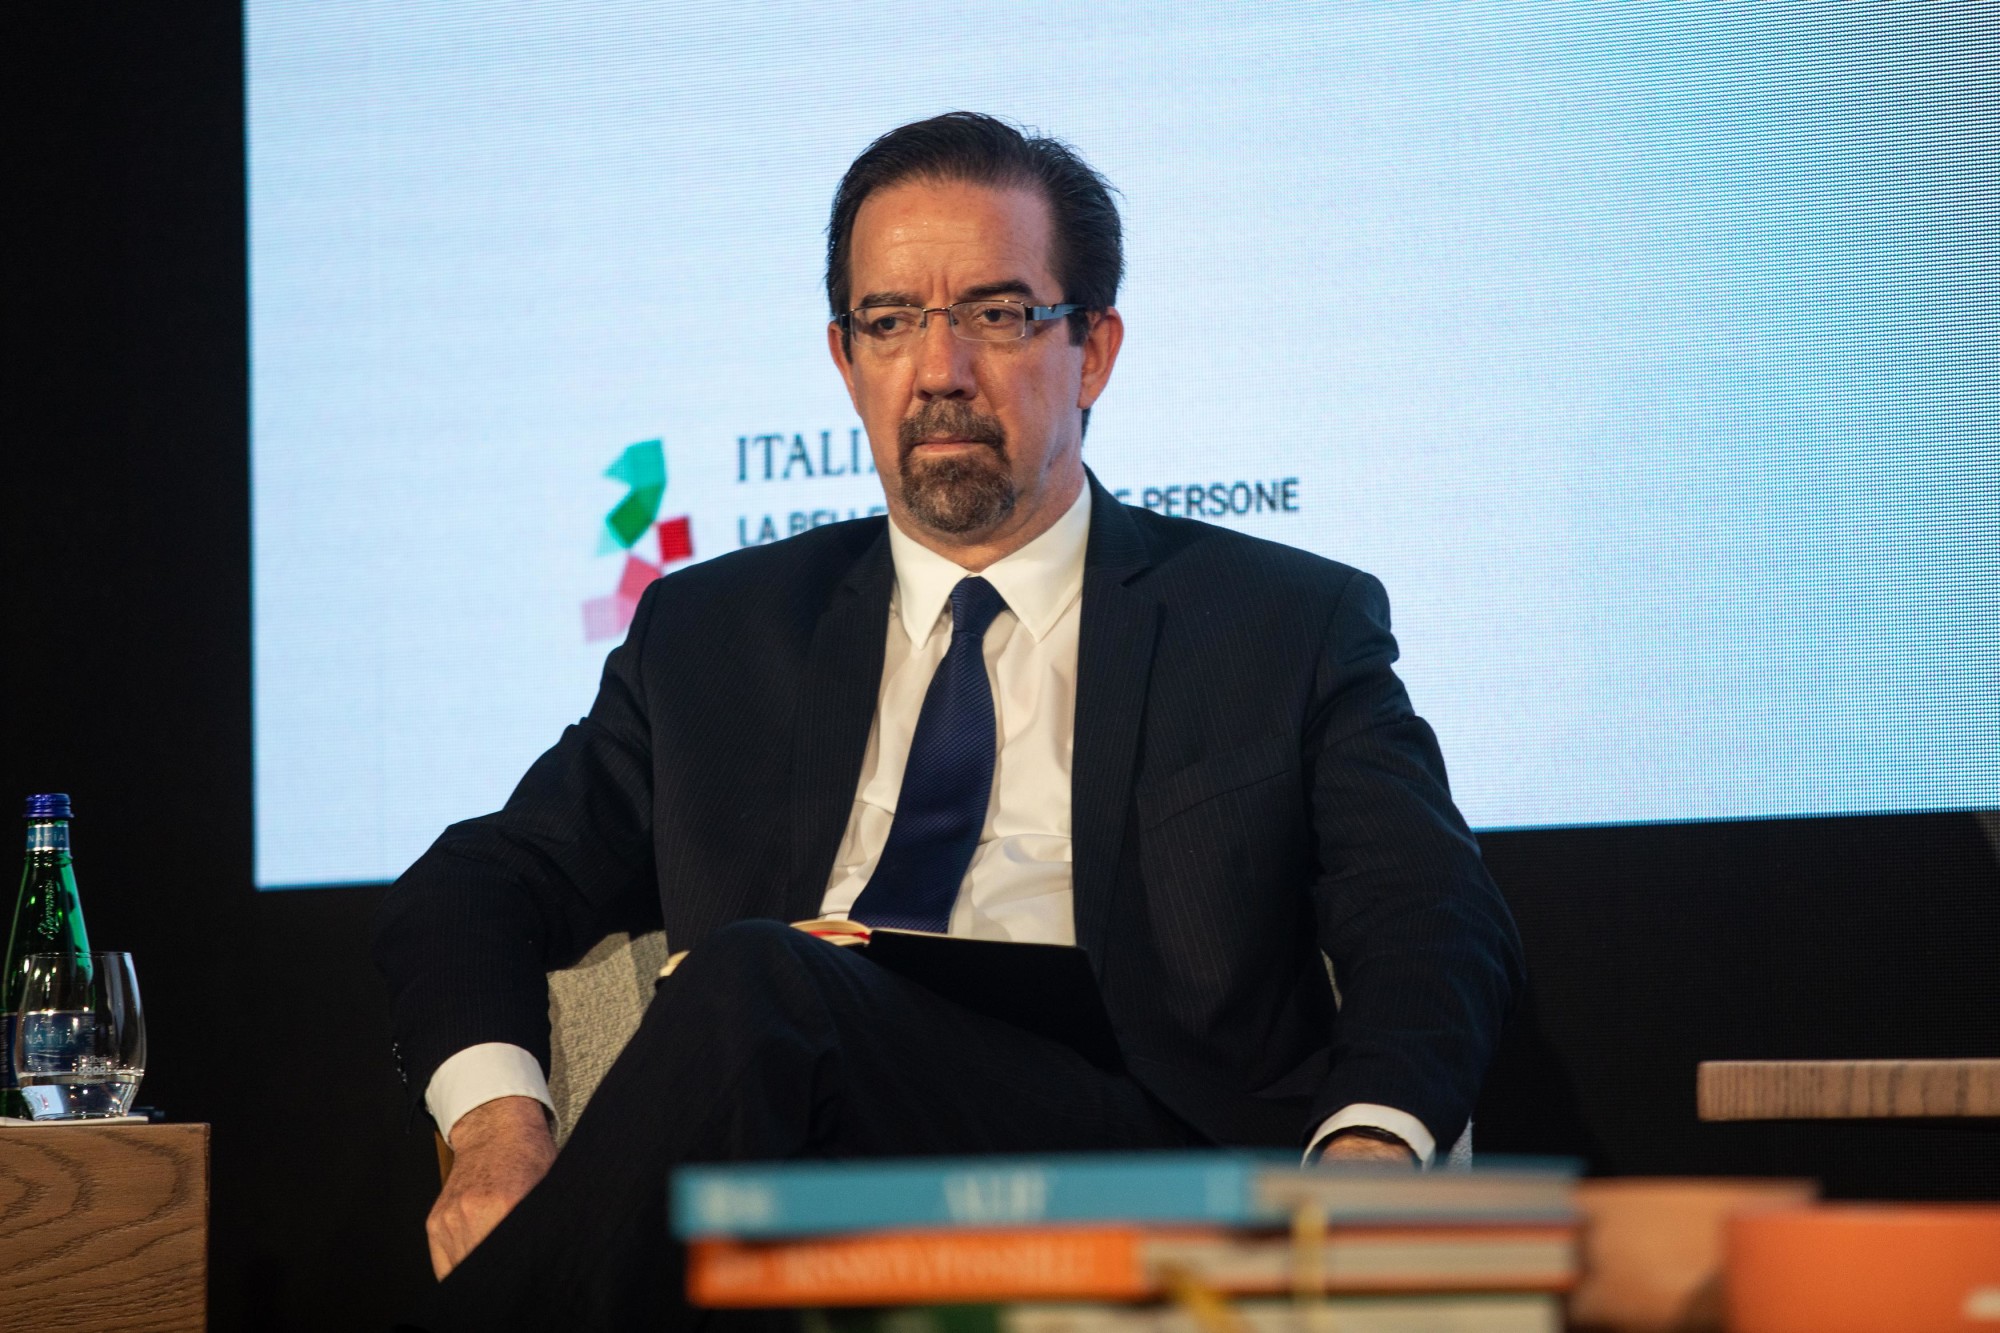 Dr Celso Moretti, CEO, EMBRAPA, Brazil during World Majlis Food for Thought How will we eat in the future at the Italy Pavilion m53560